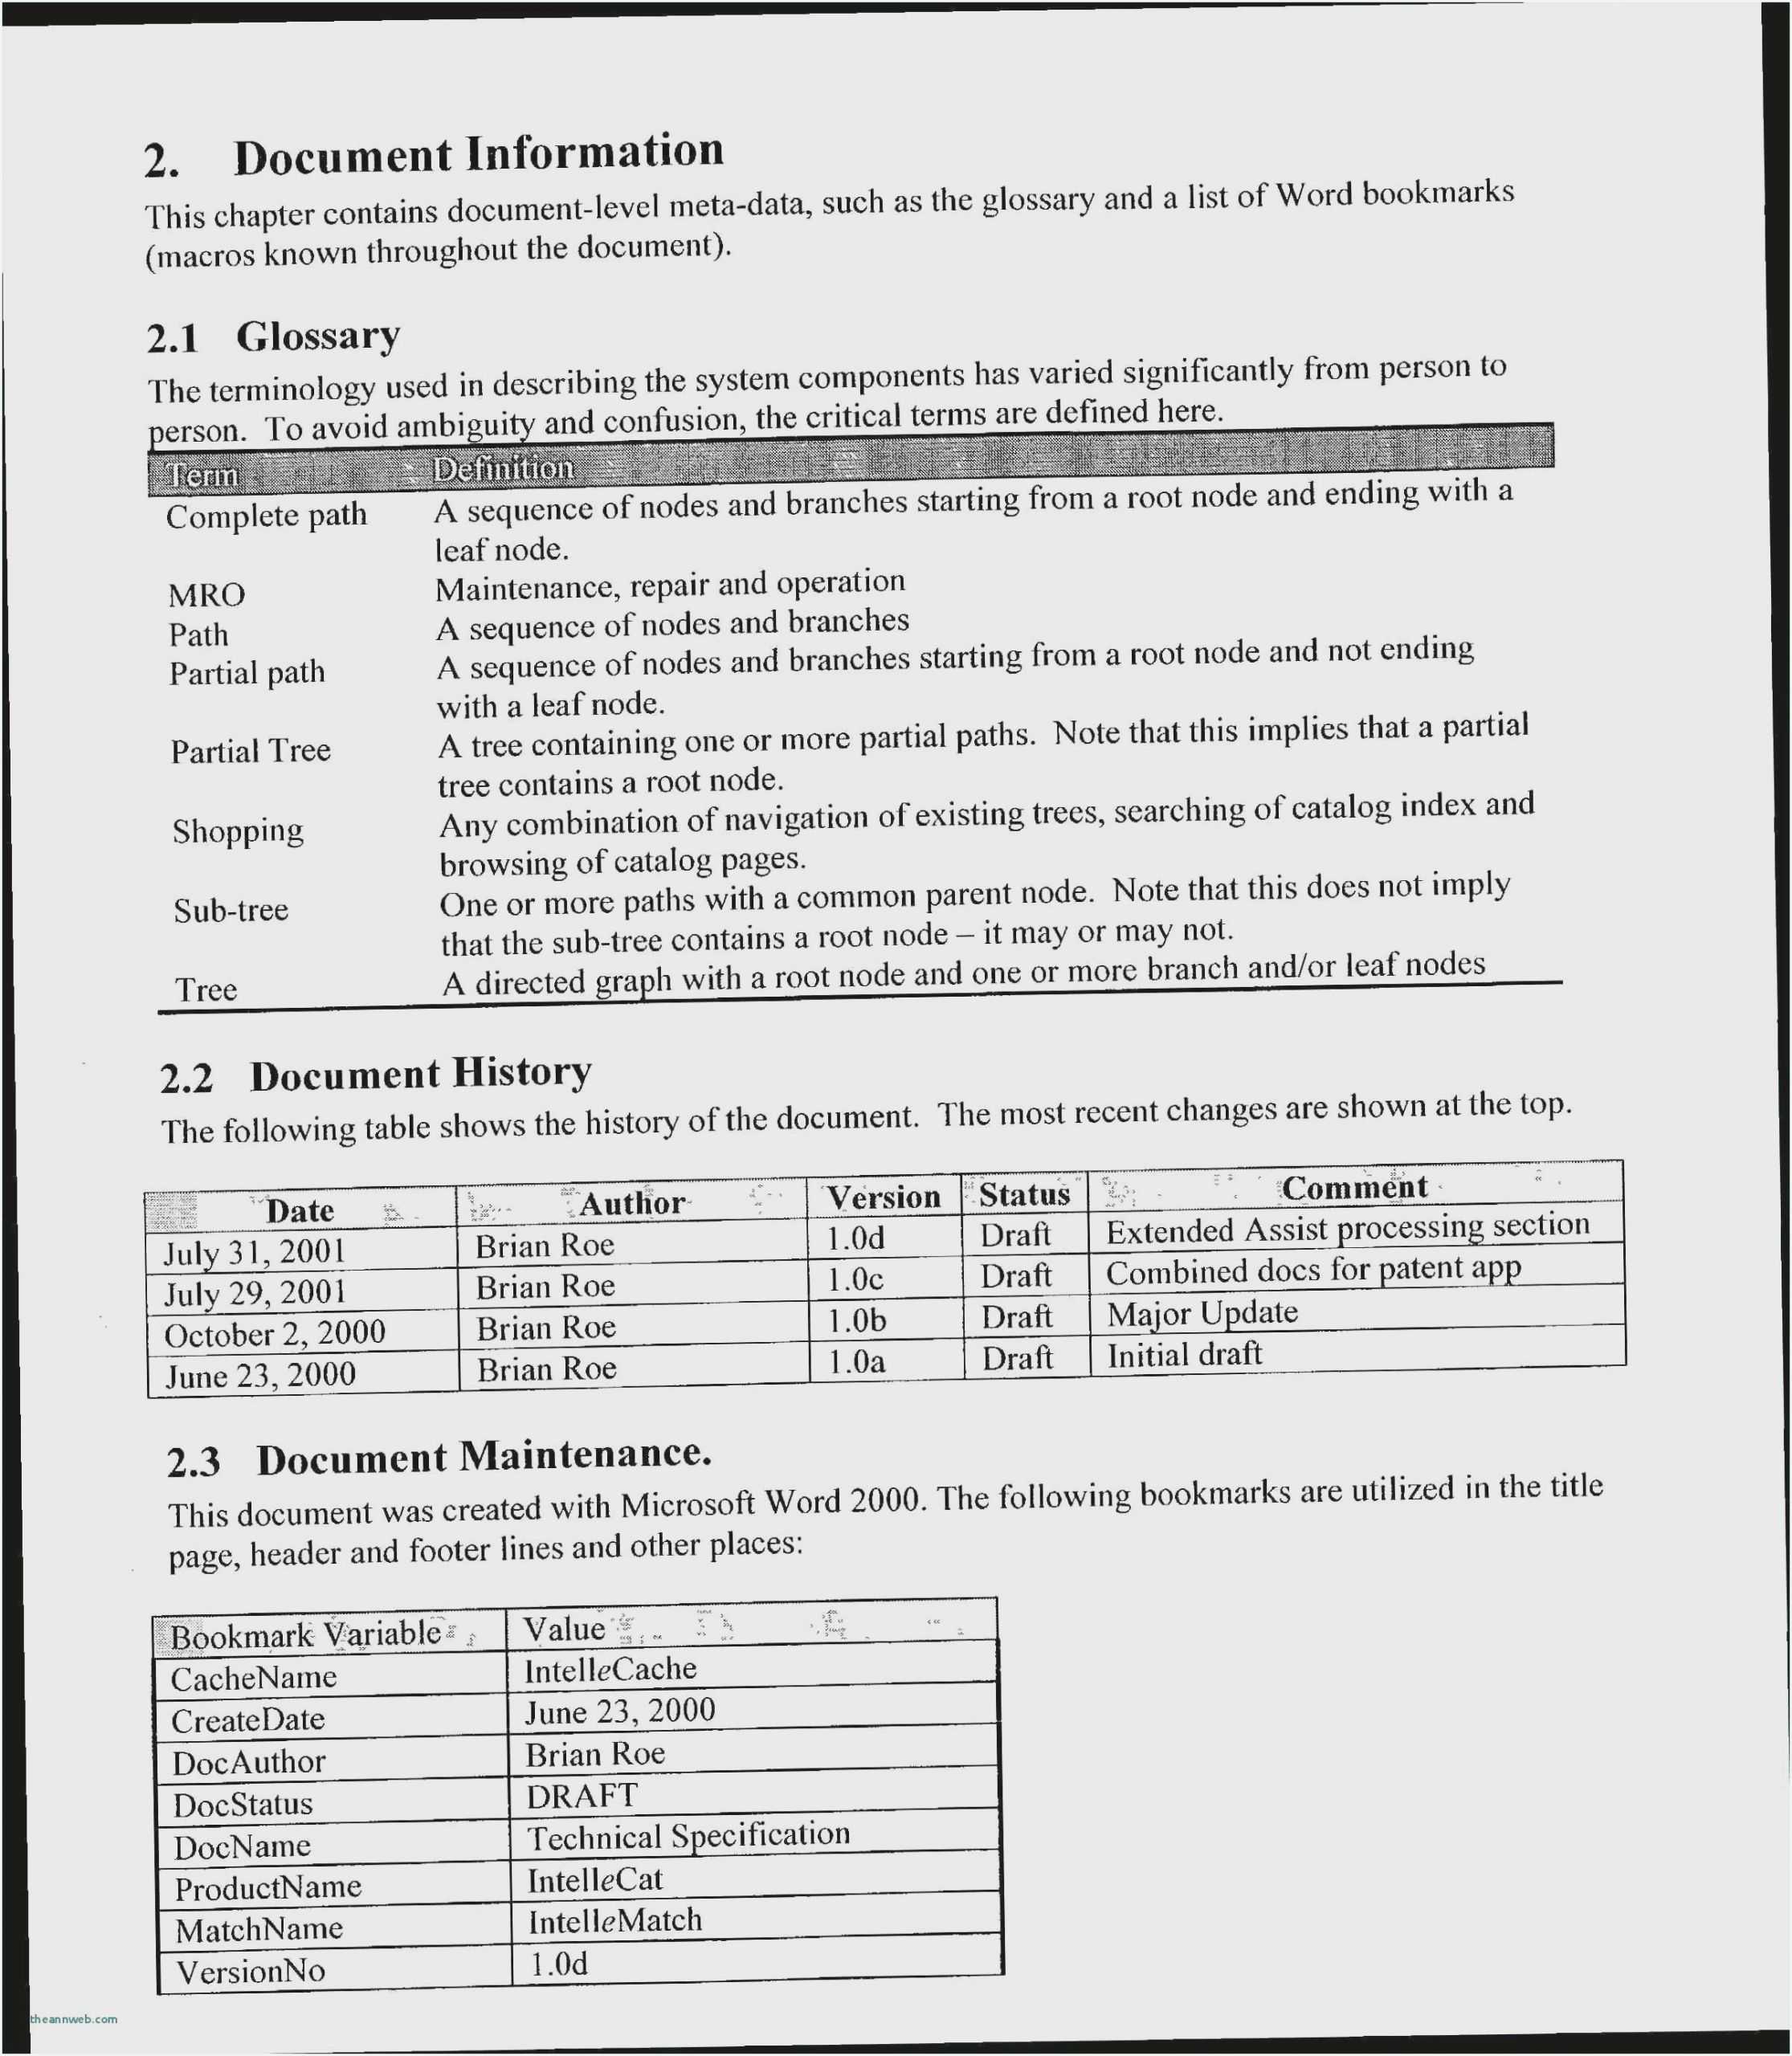 Download Resume Templates For Word 2010 - Resume Sample Intended For Resume Templates Microsoft Word 2010